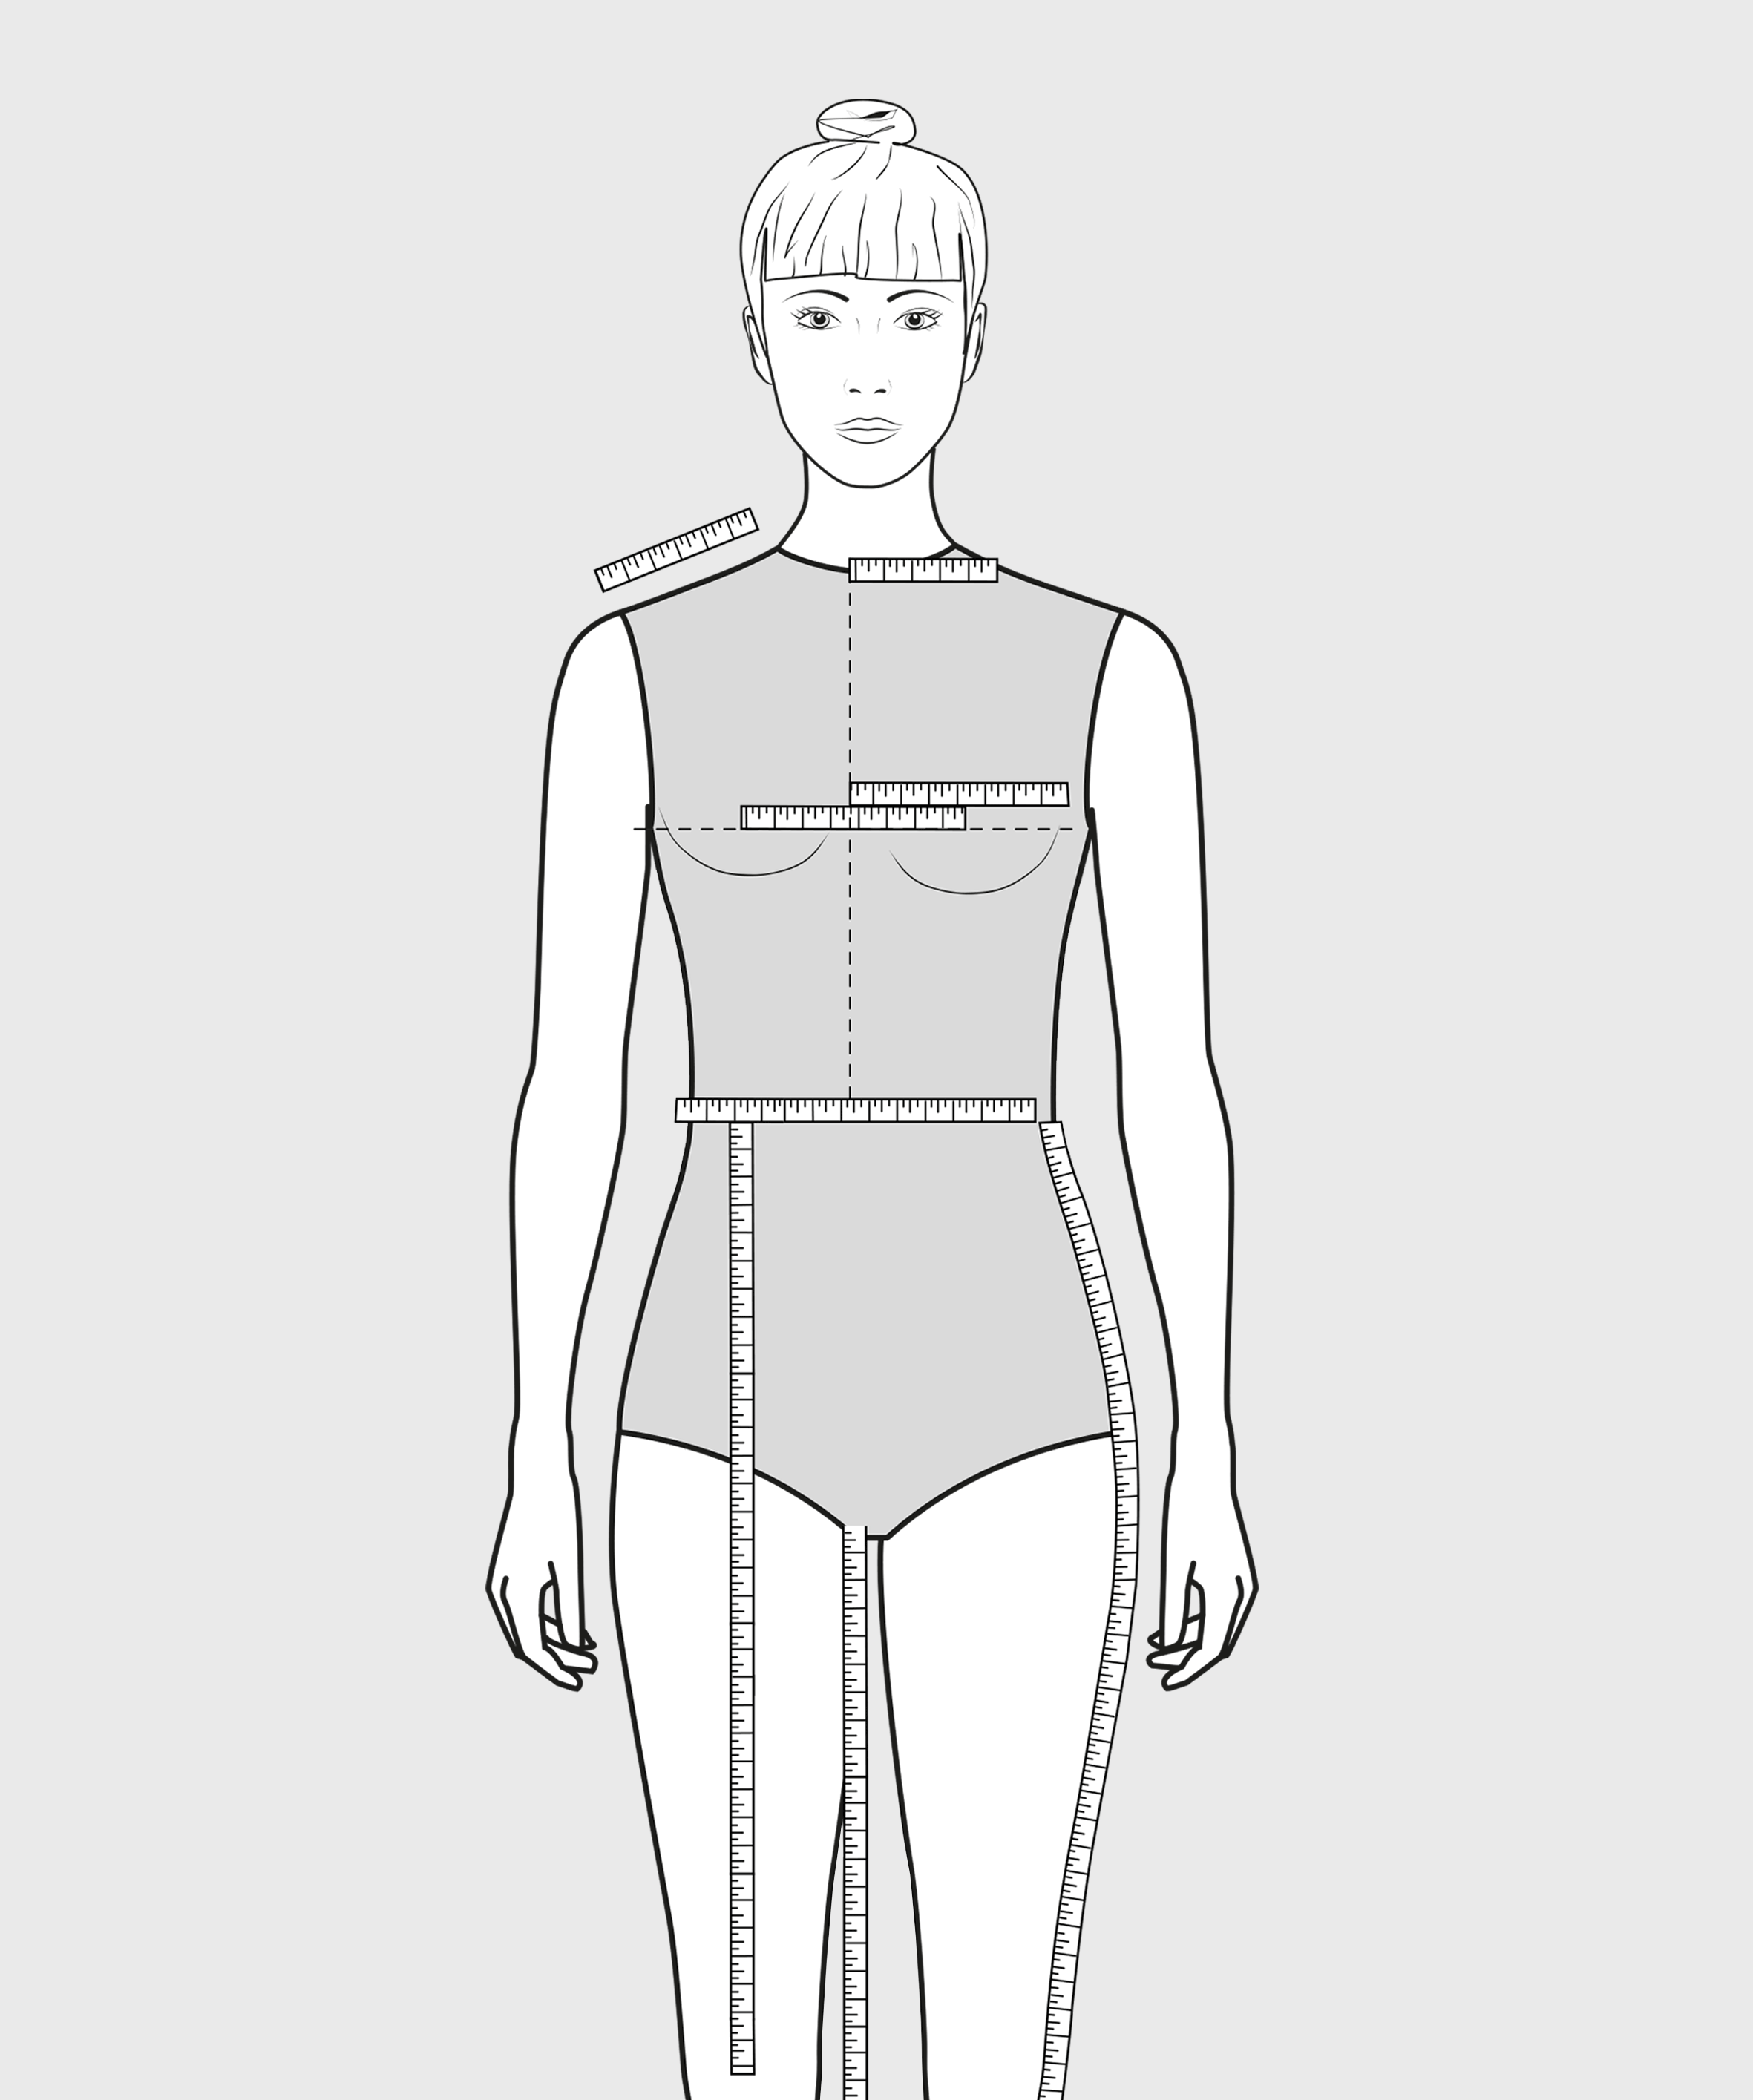 How To Measure Your Torso Length + Waist Size For A Waist Trainer